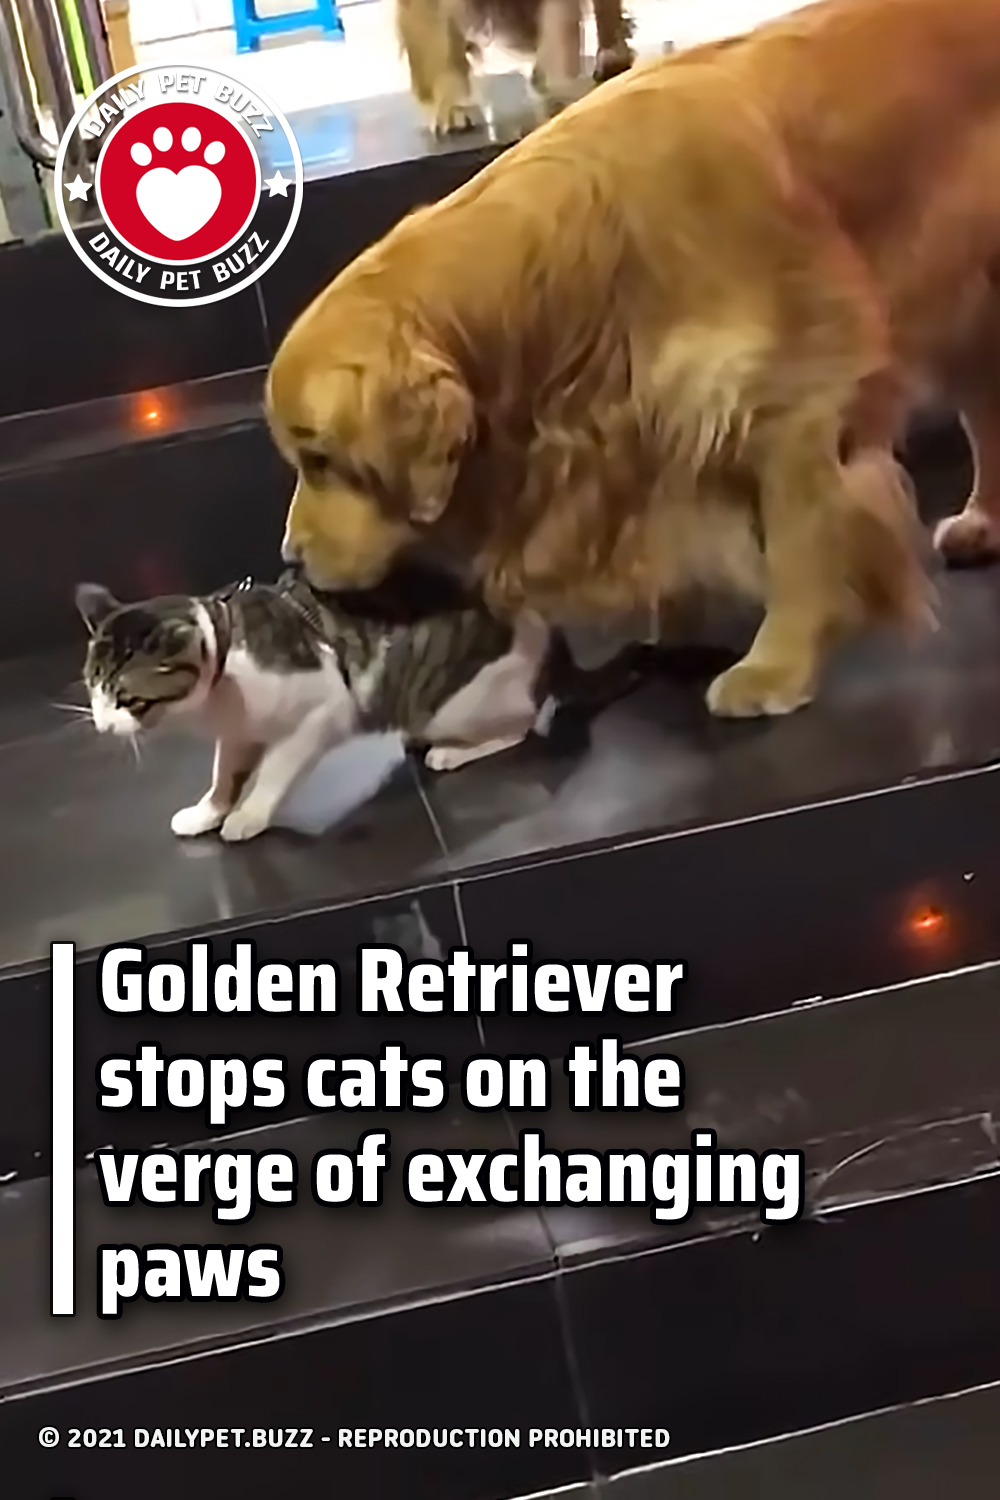 Golden Retriever stops cats on the verge of exchanging paws